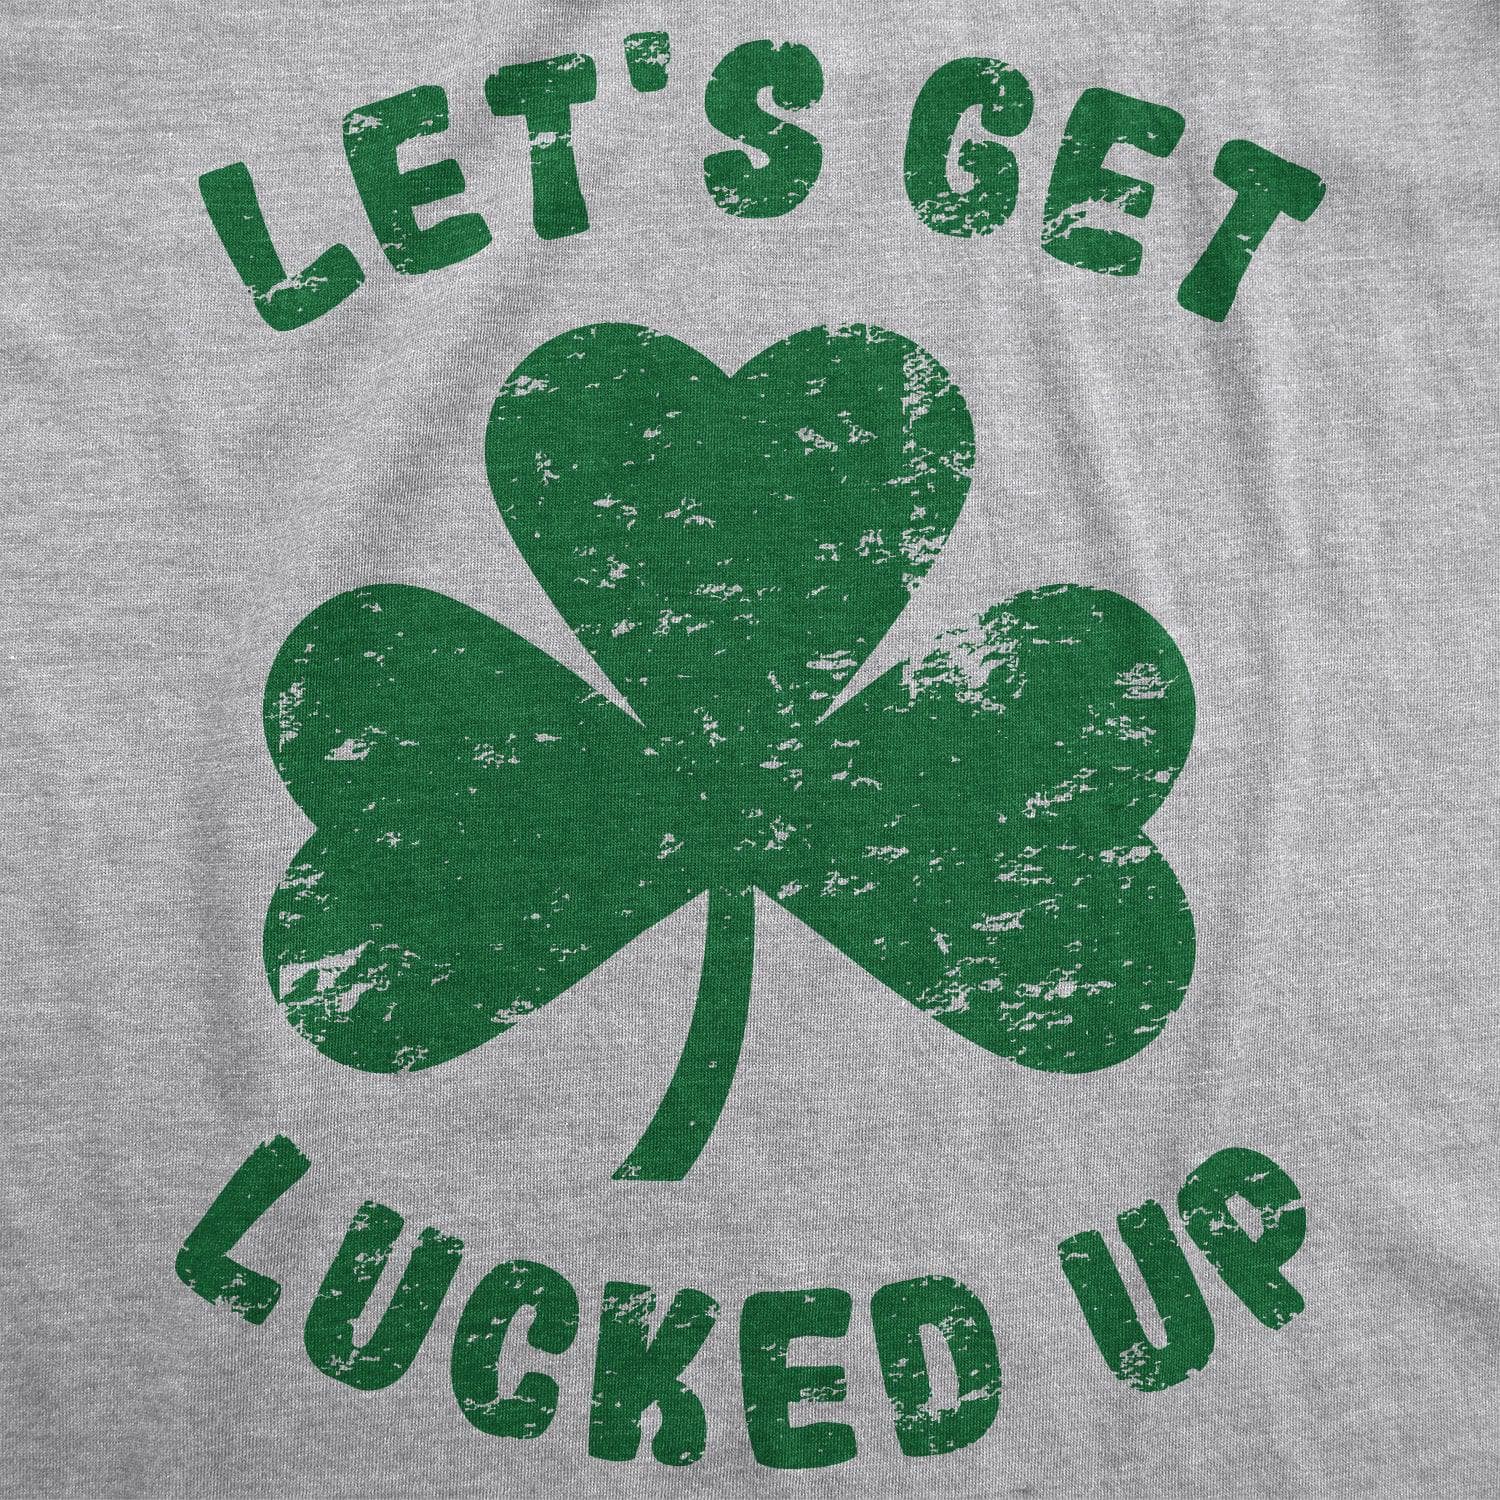 Let's Get Lucked Up Men's Tshirt  -  Crazy Dog T-Shirts